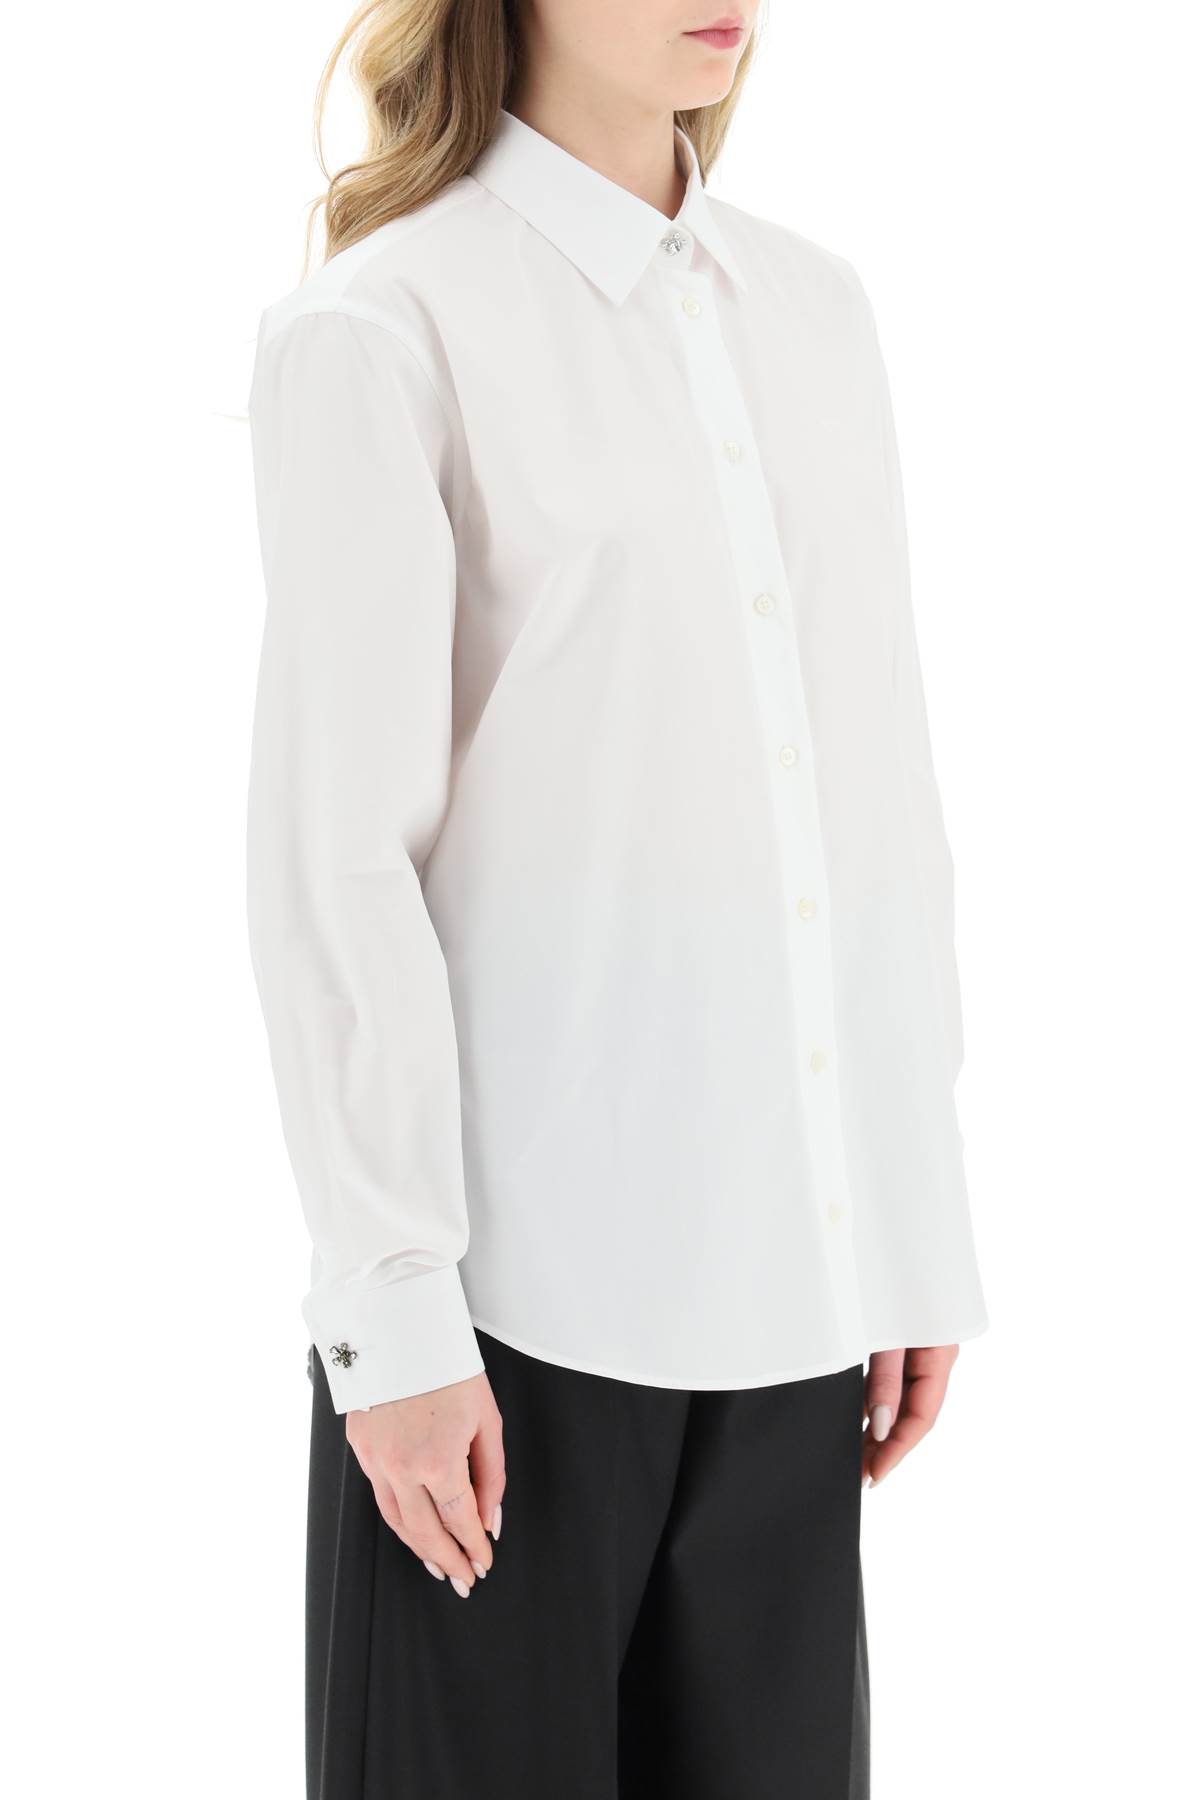 Shop N°21 Shirt With Jewel Buttons In Bianco Ottico (white)